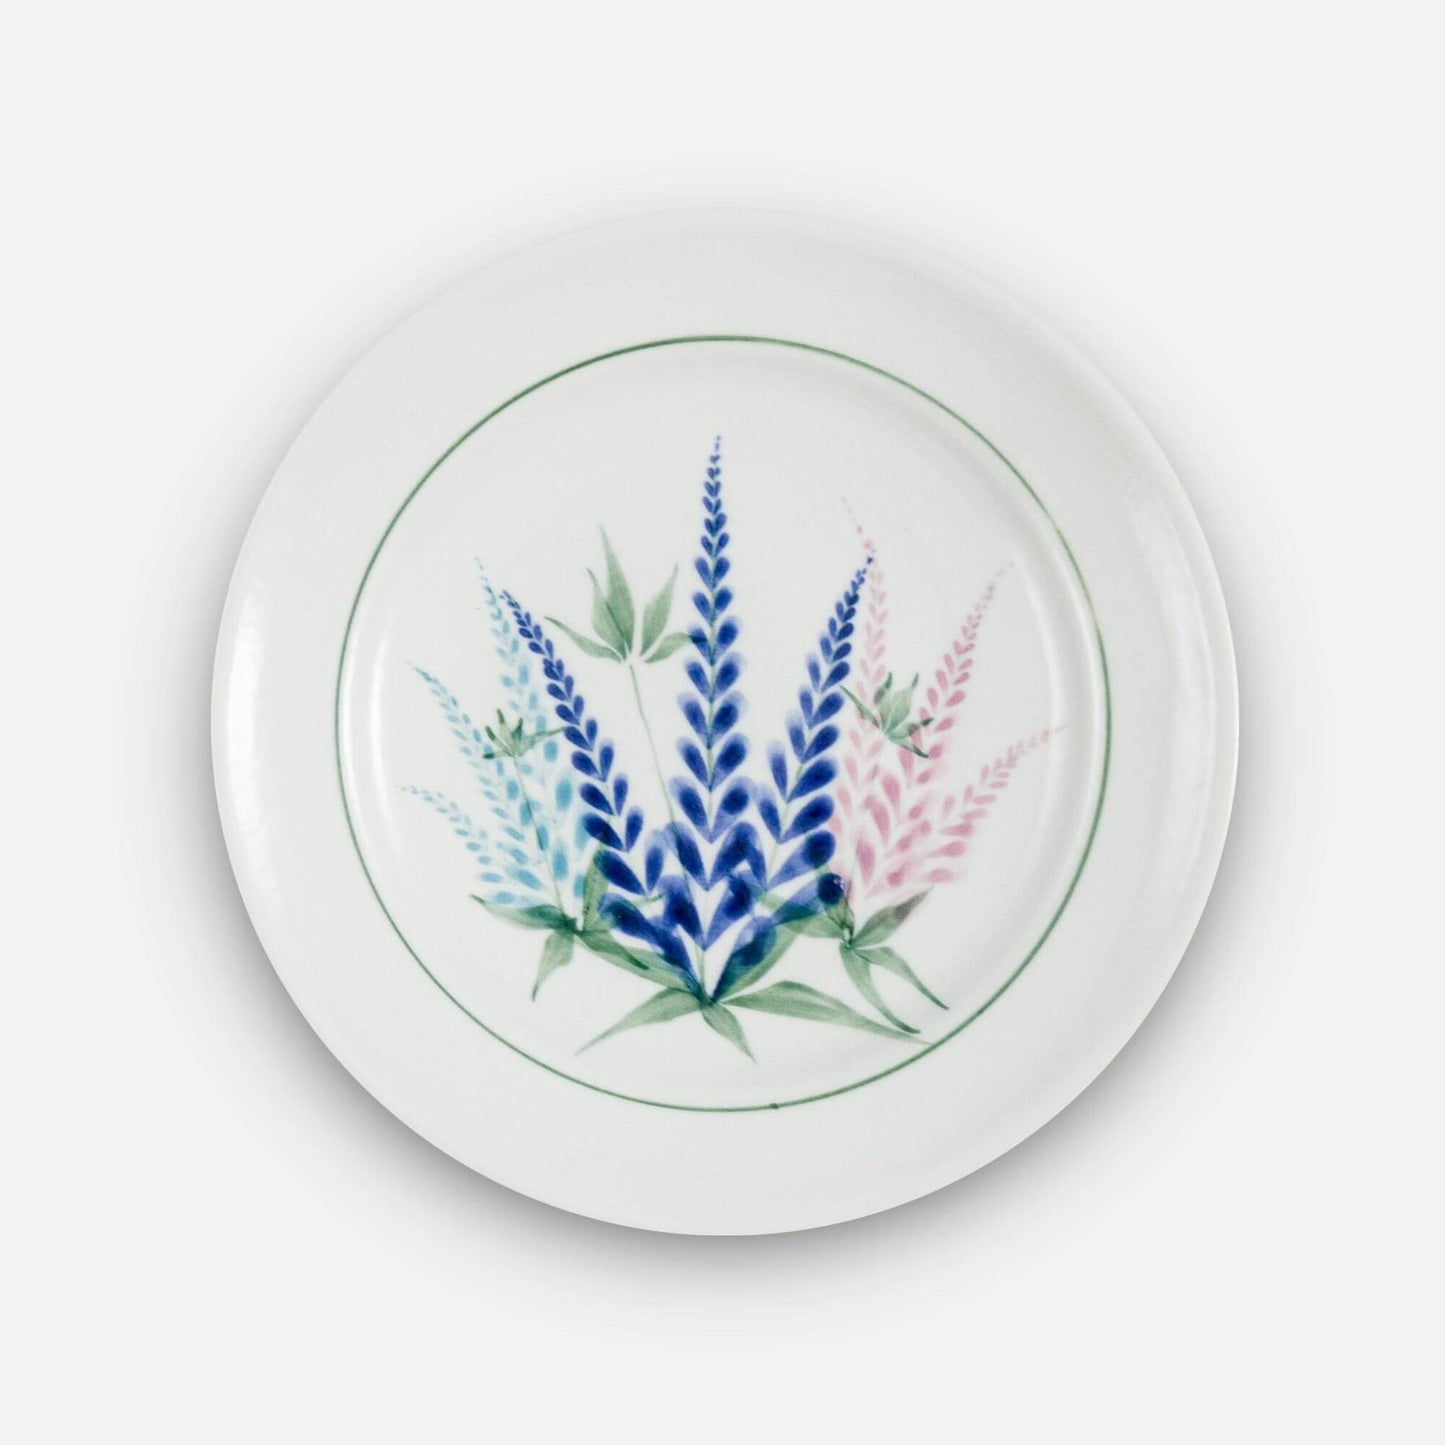 Handmade Pottery Classic Dessert Plate in Lupine pattern made by Georgetown Pottery in Maine